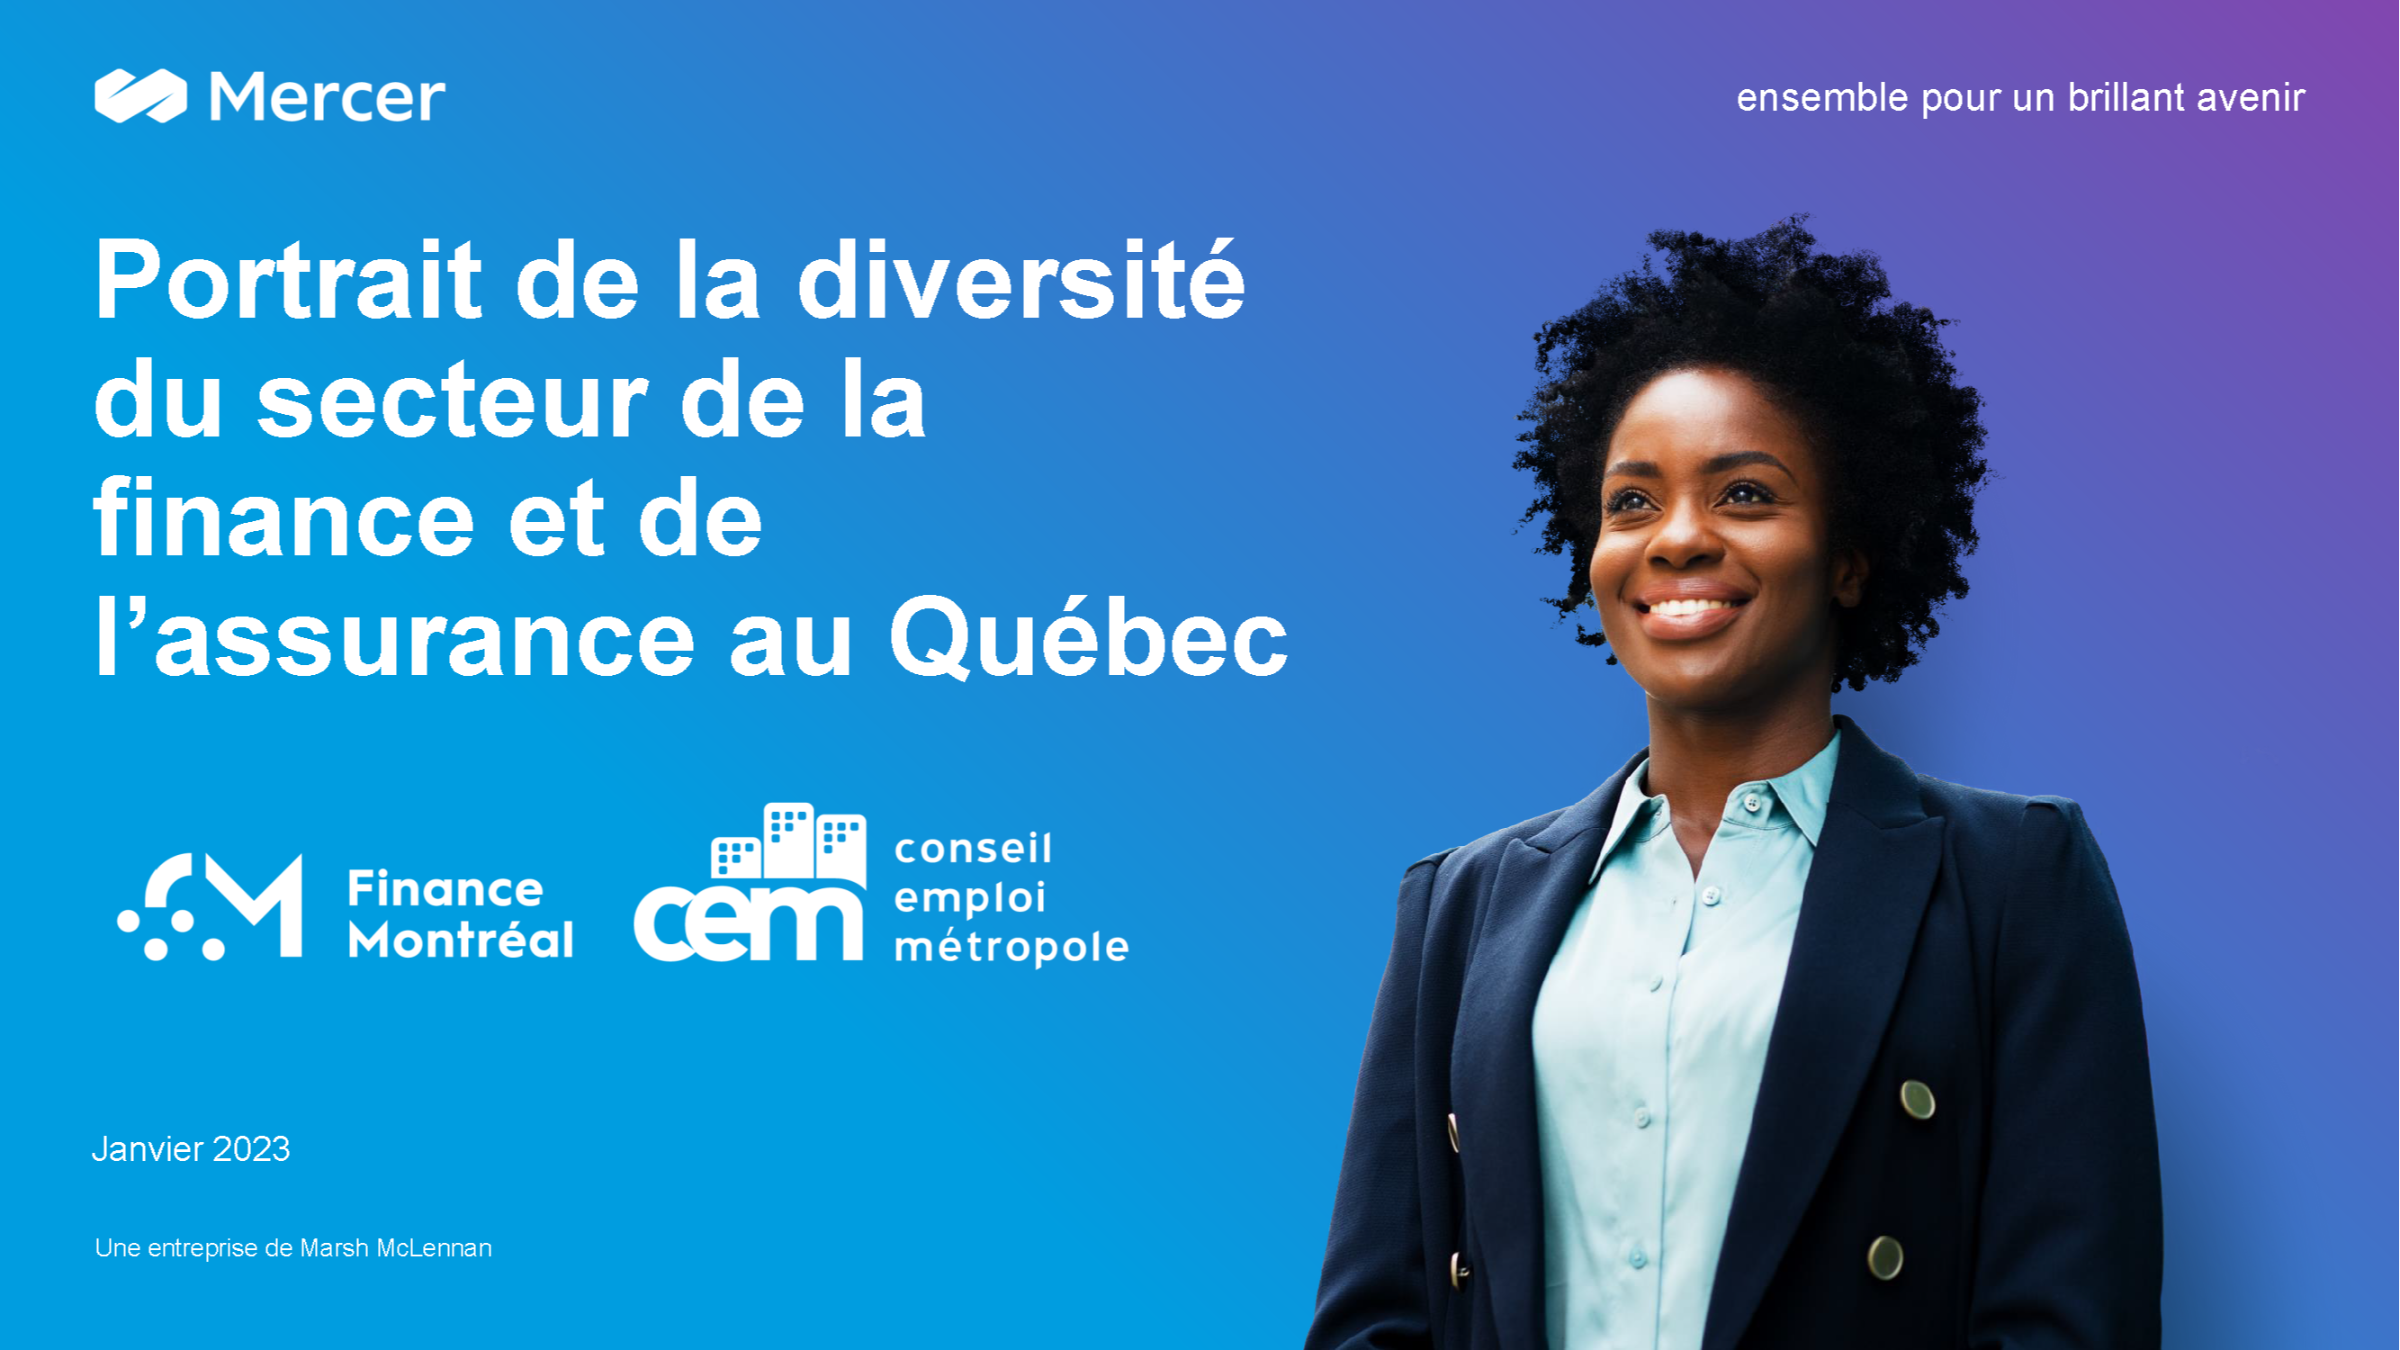 First Portrait of the diversity of the finance and insurance sector in Quebec: an encouraging representation of women and visible minorities, but efforts need to be made for this to extend to executive positions